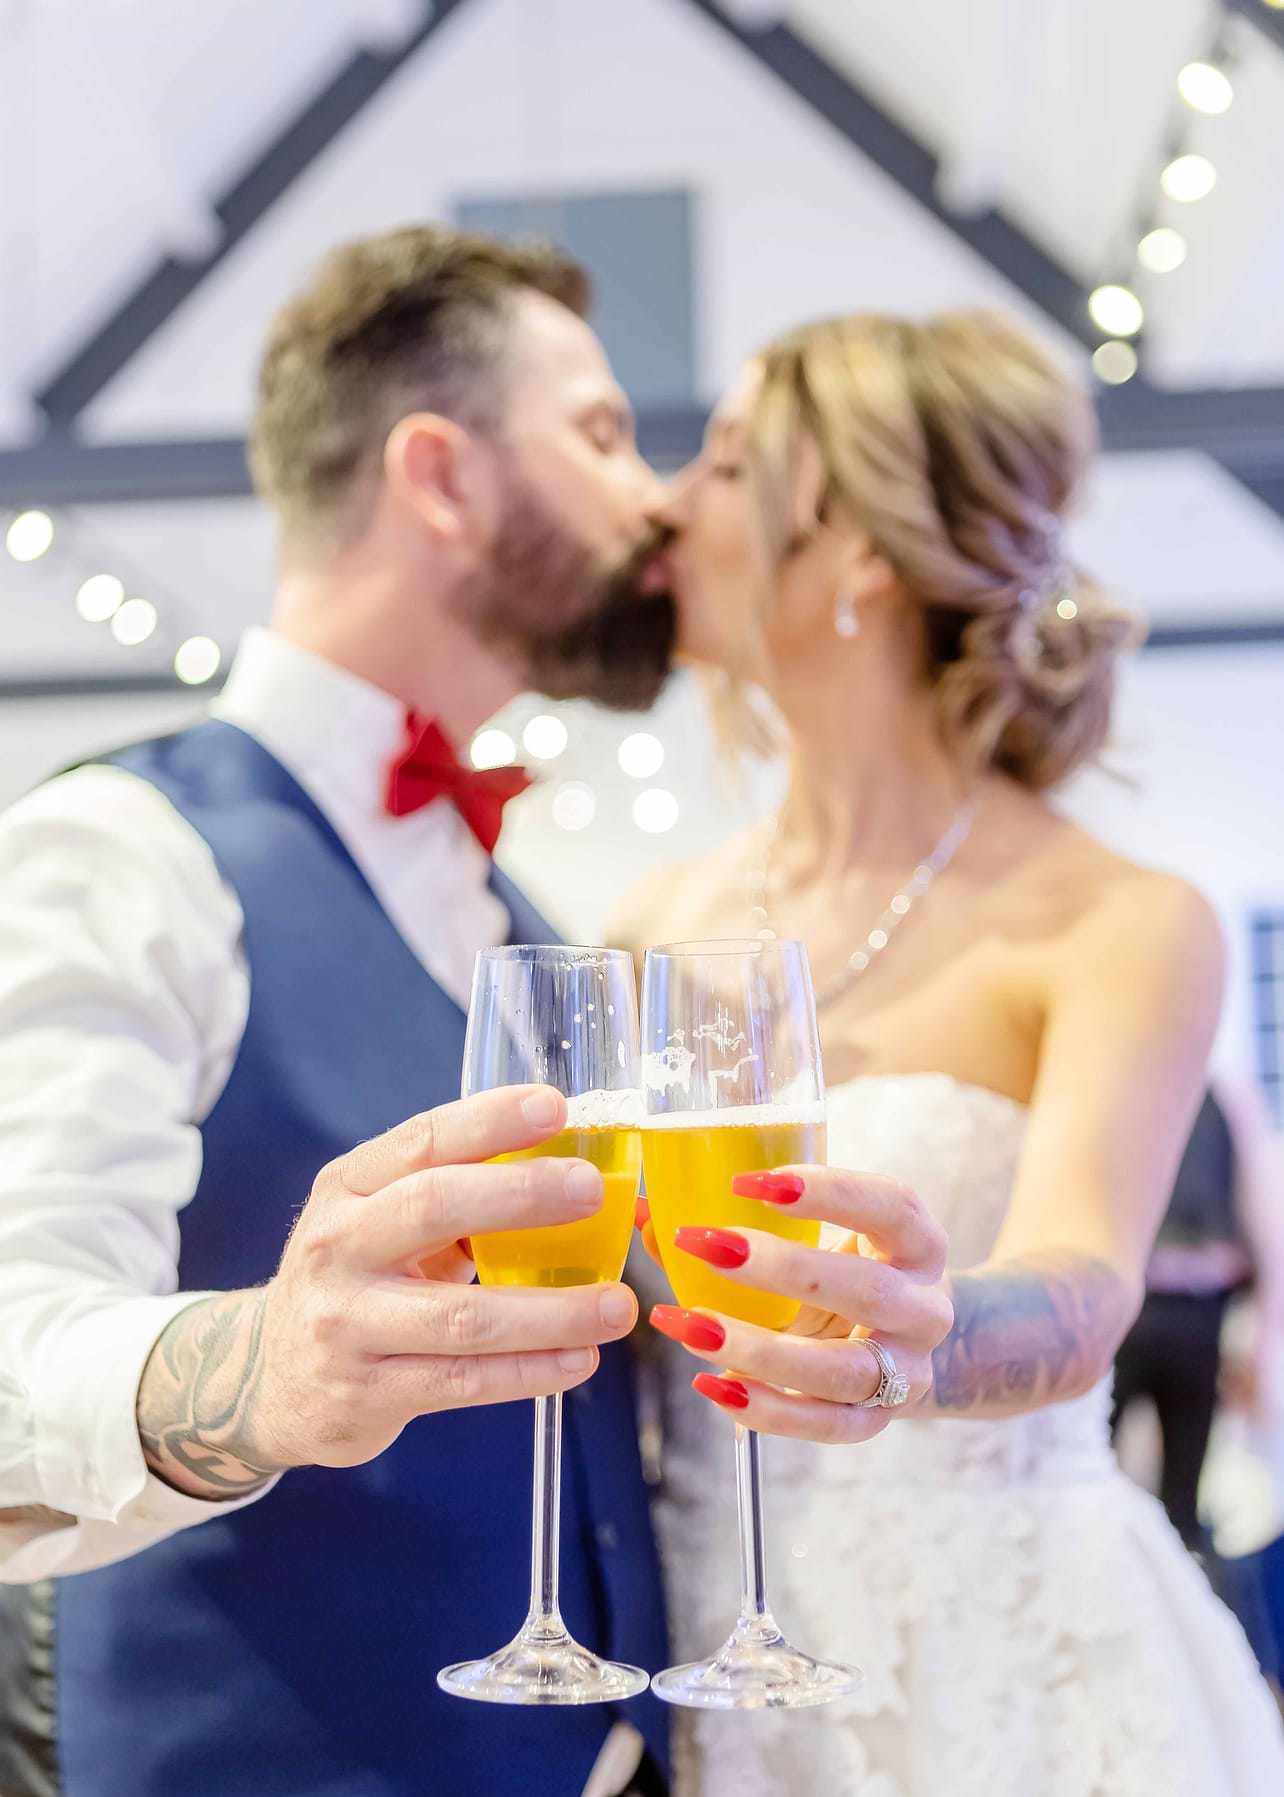 The Modern Wedding: Why Alcohol-Free is the New Chic